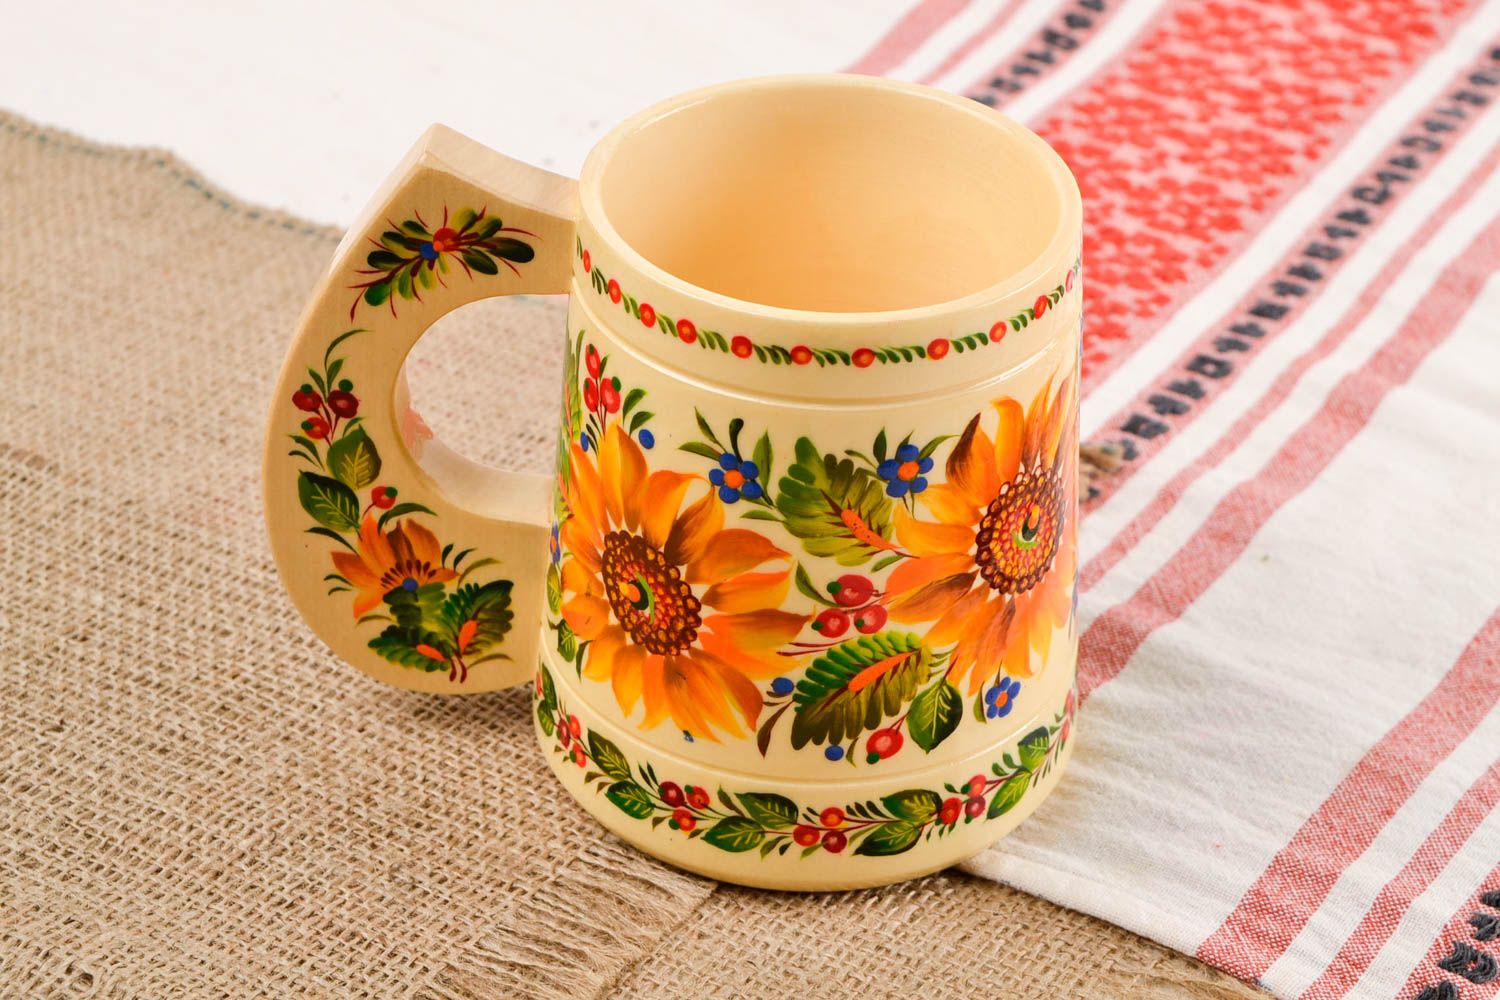 Handmade mug designer wooden cup decorative use only gift ideas home decor photo 1